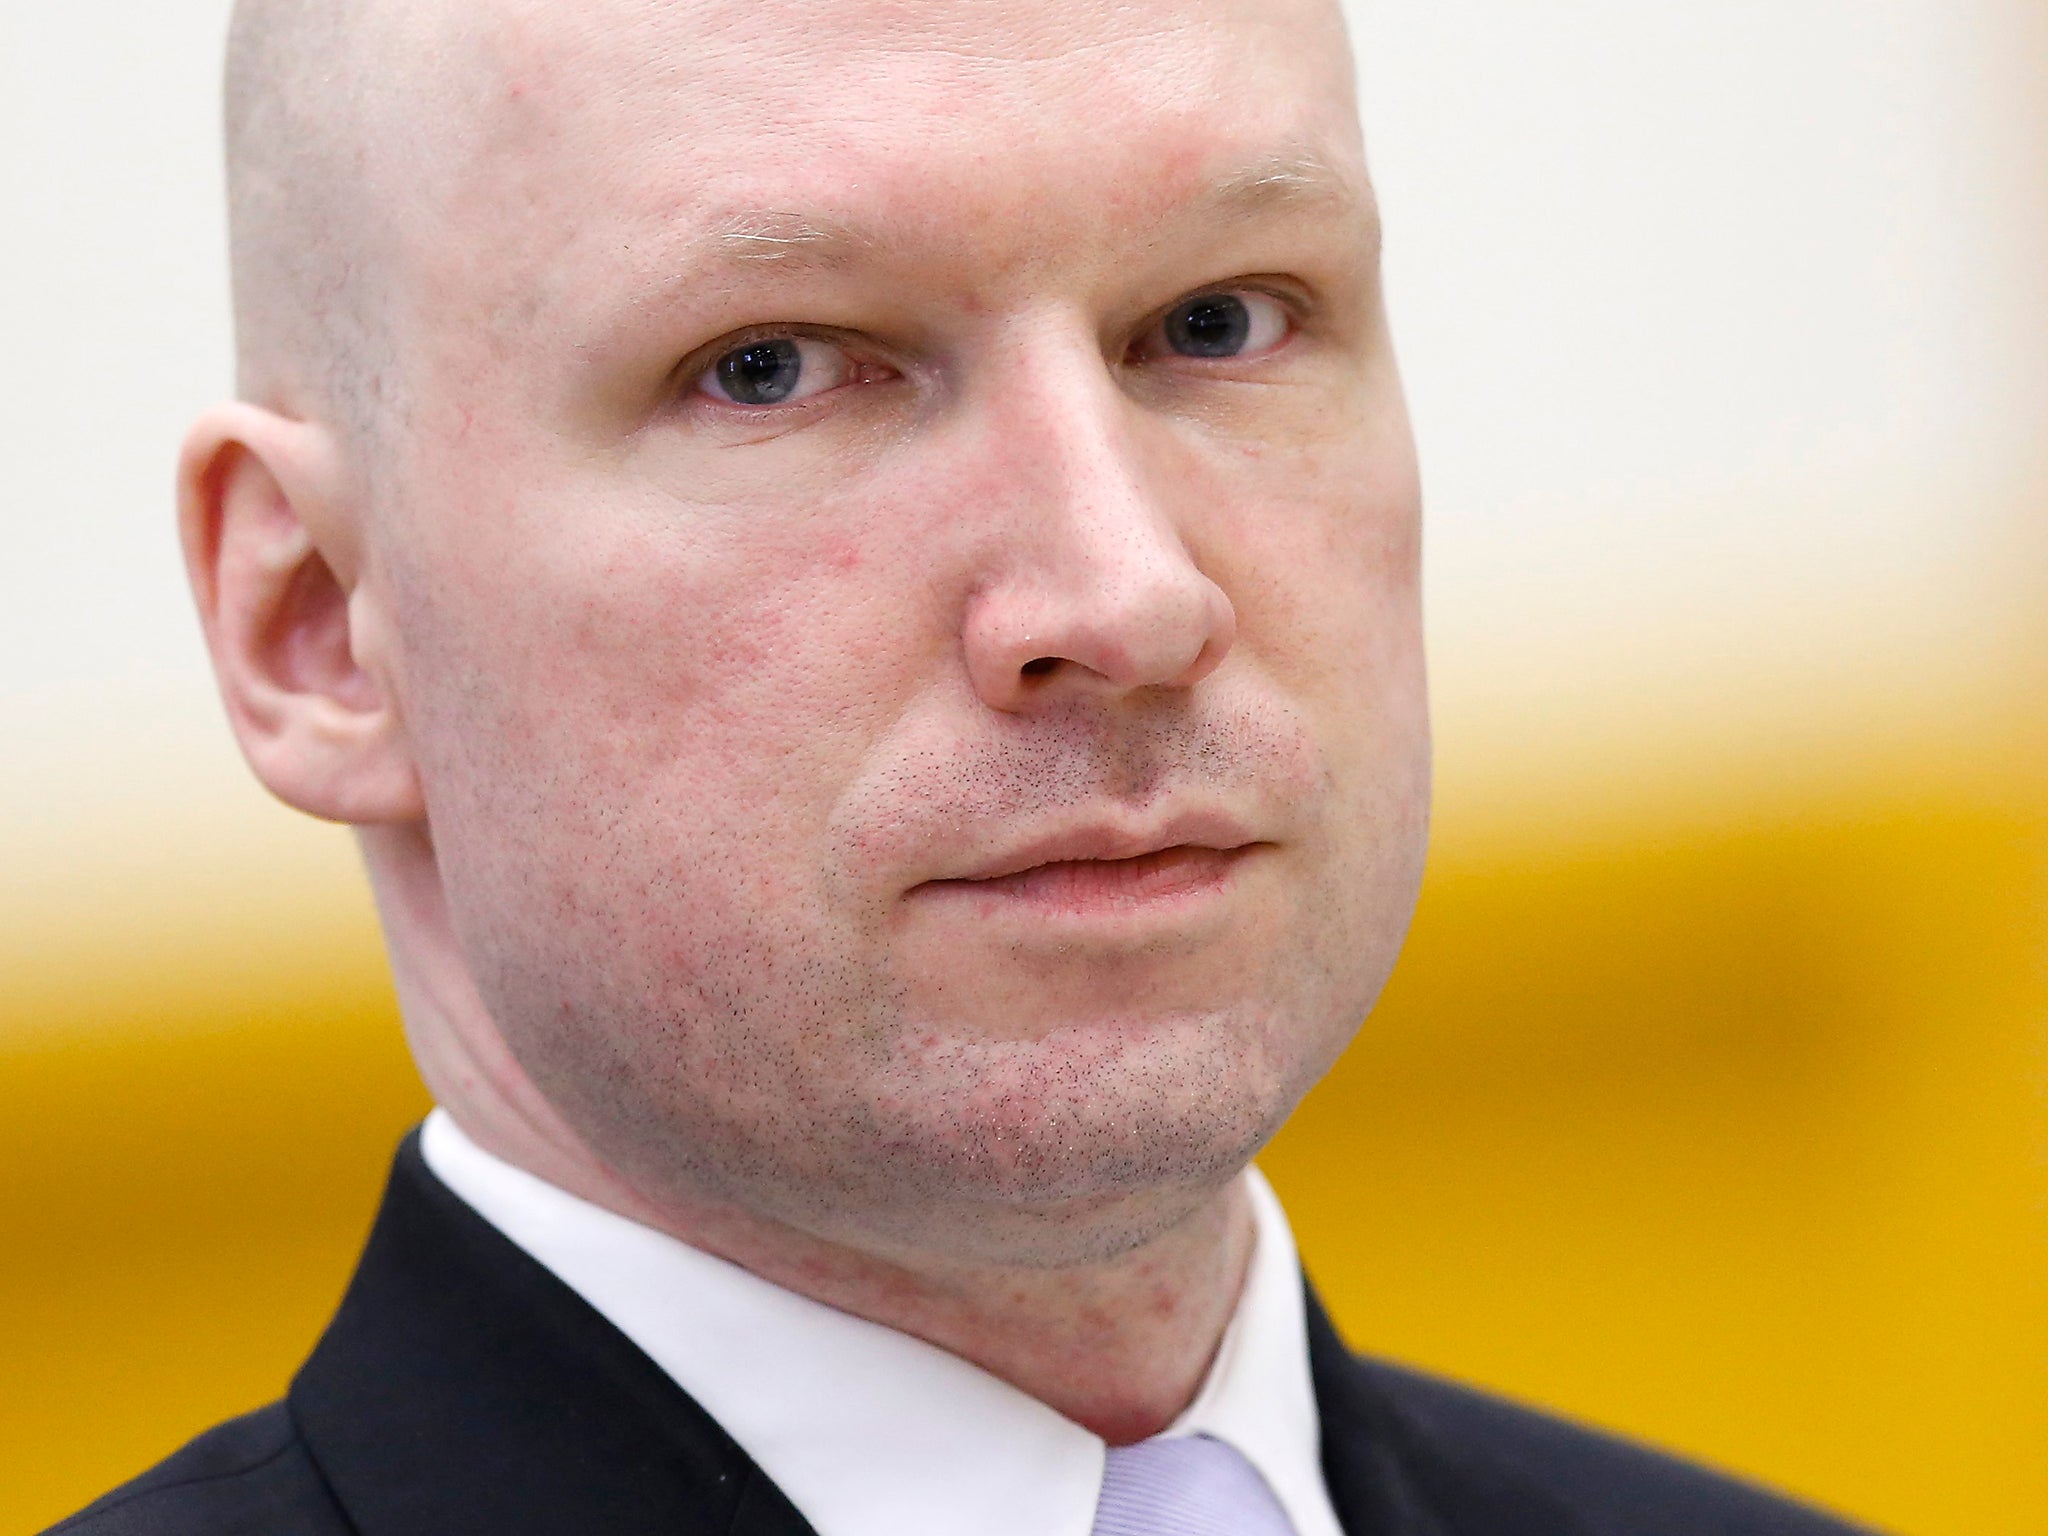 Breivik has never shown remorse for his crimes